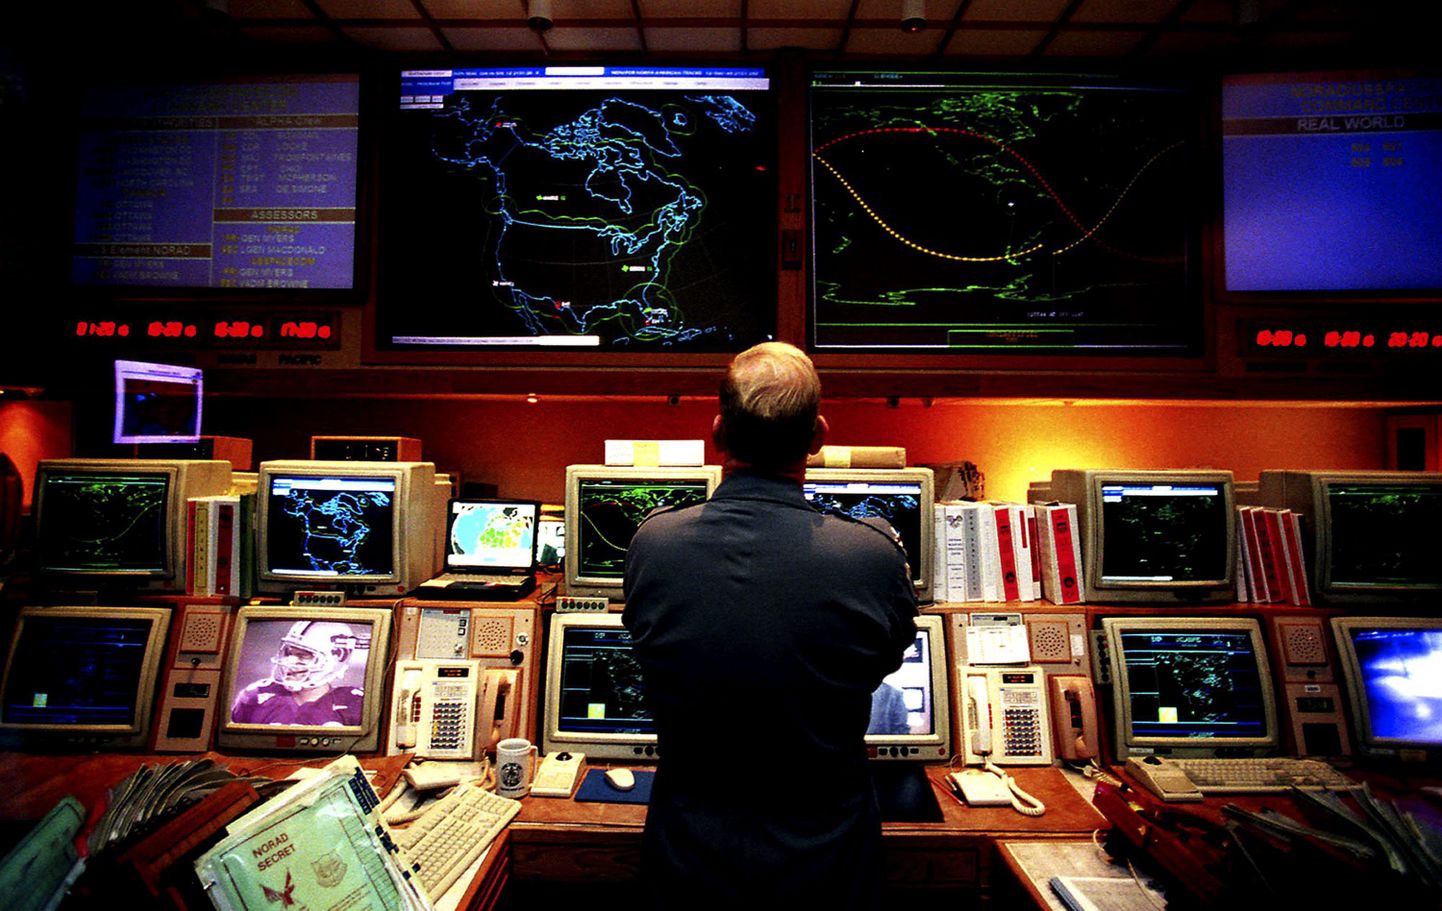 Colorado: A U.S. commander, sheltered from any potential nuclear missile attacks, stands watch three days before Y2K at the North American Aerospace Defense Command (NORAD) in the Cheyenne Mountain Complex, Wednesday, December 29, 1999. The complex is an underground combat operations center near Colorado Springs. The joint U.S.-Canadian center is monitoring the turn of the millenium closely because of the potential threat of errant nuclear missile launches caused by Y2K.